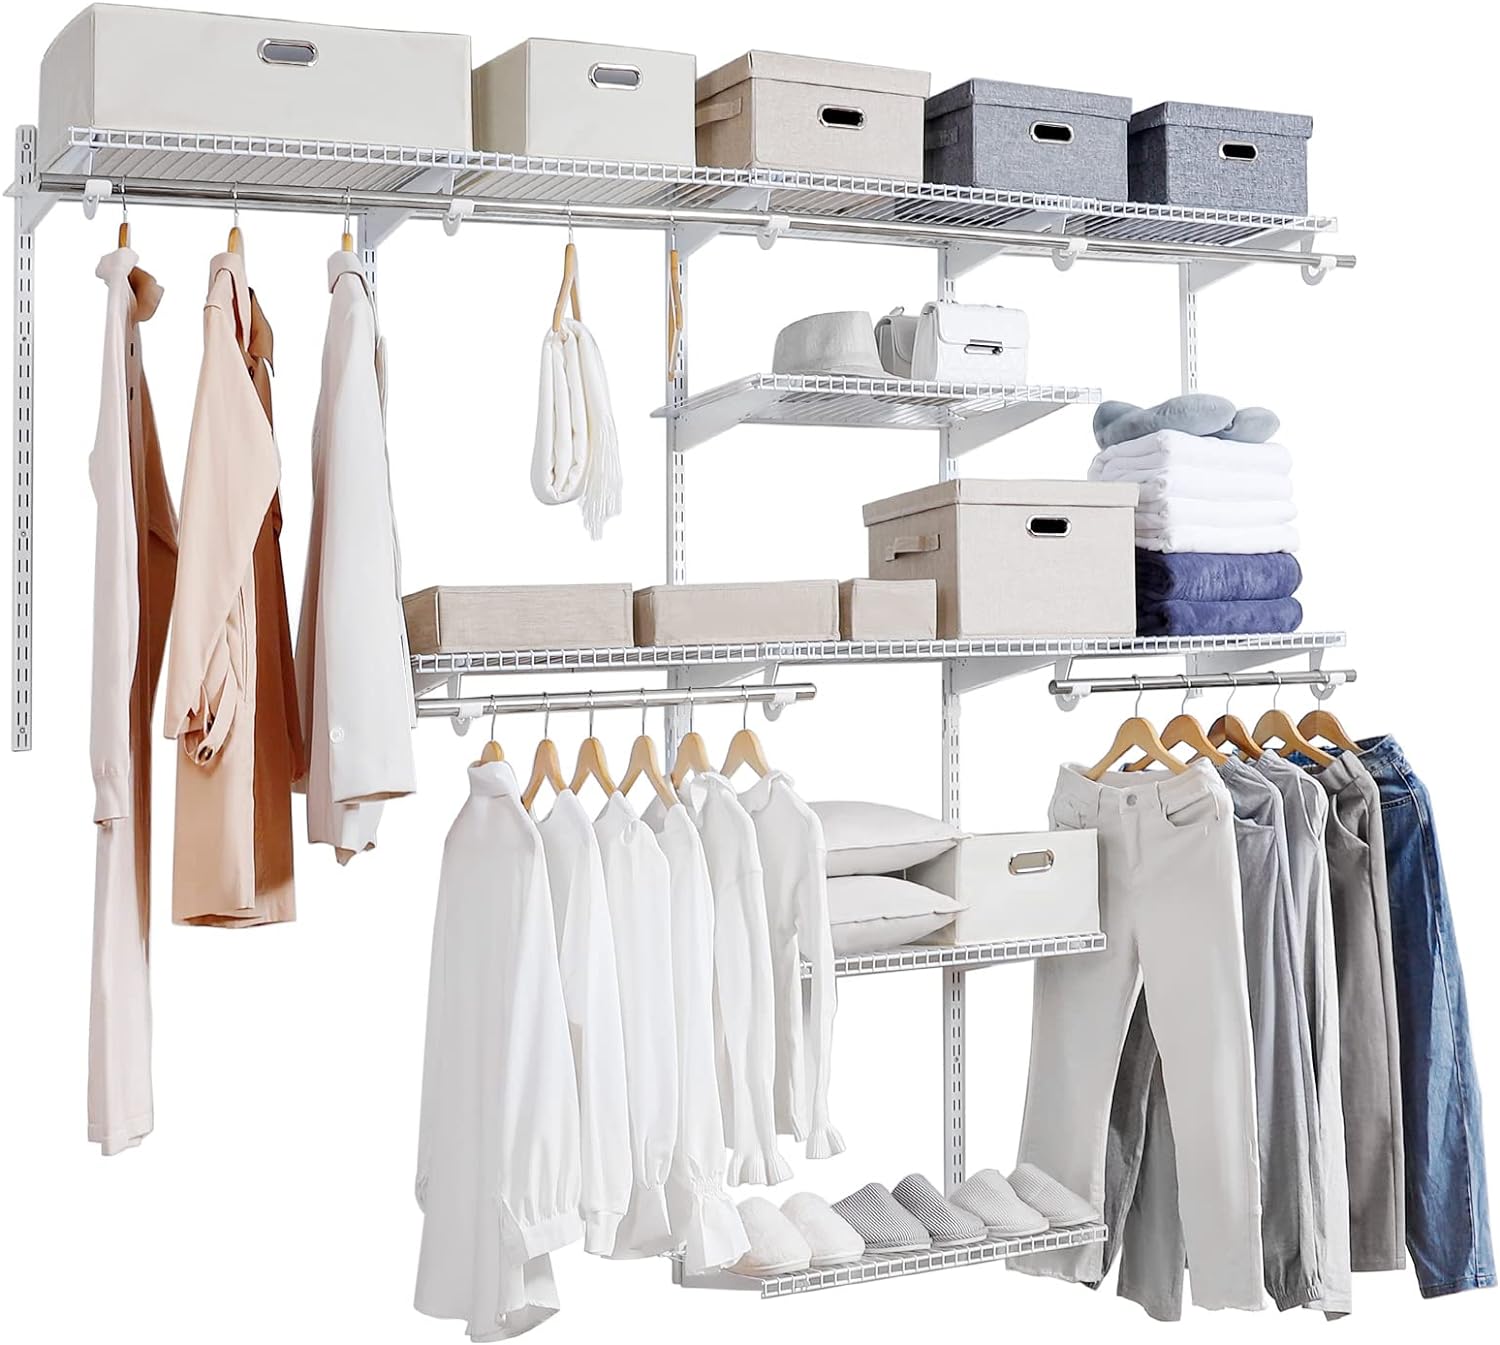 Homde Closet Organizer System Wall Mounted,Adjustable and Expandable Walk in Closet System, Metal Wire Shelving Closet Kit, Custom DIY Wardrobe Closet Storage with Shelf, Clothes Hanging Rods (4-8 FT)